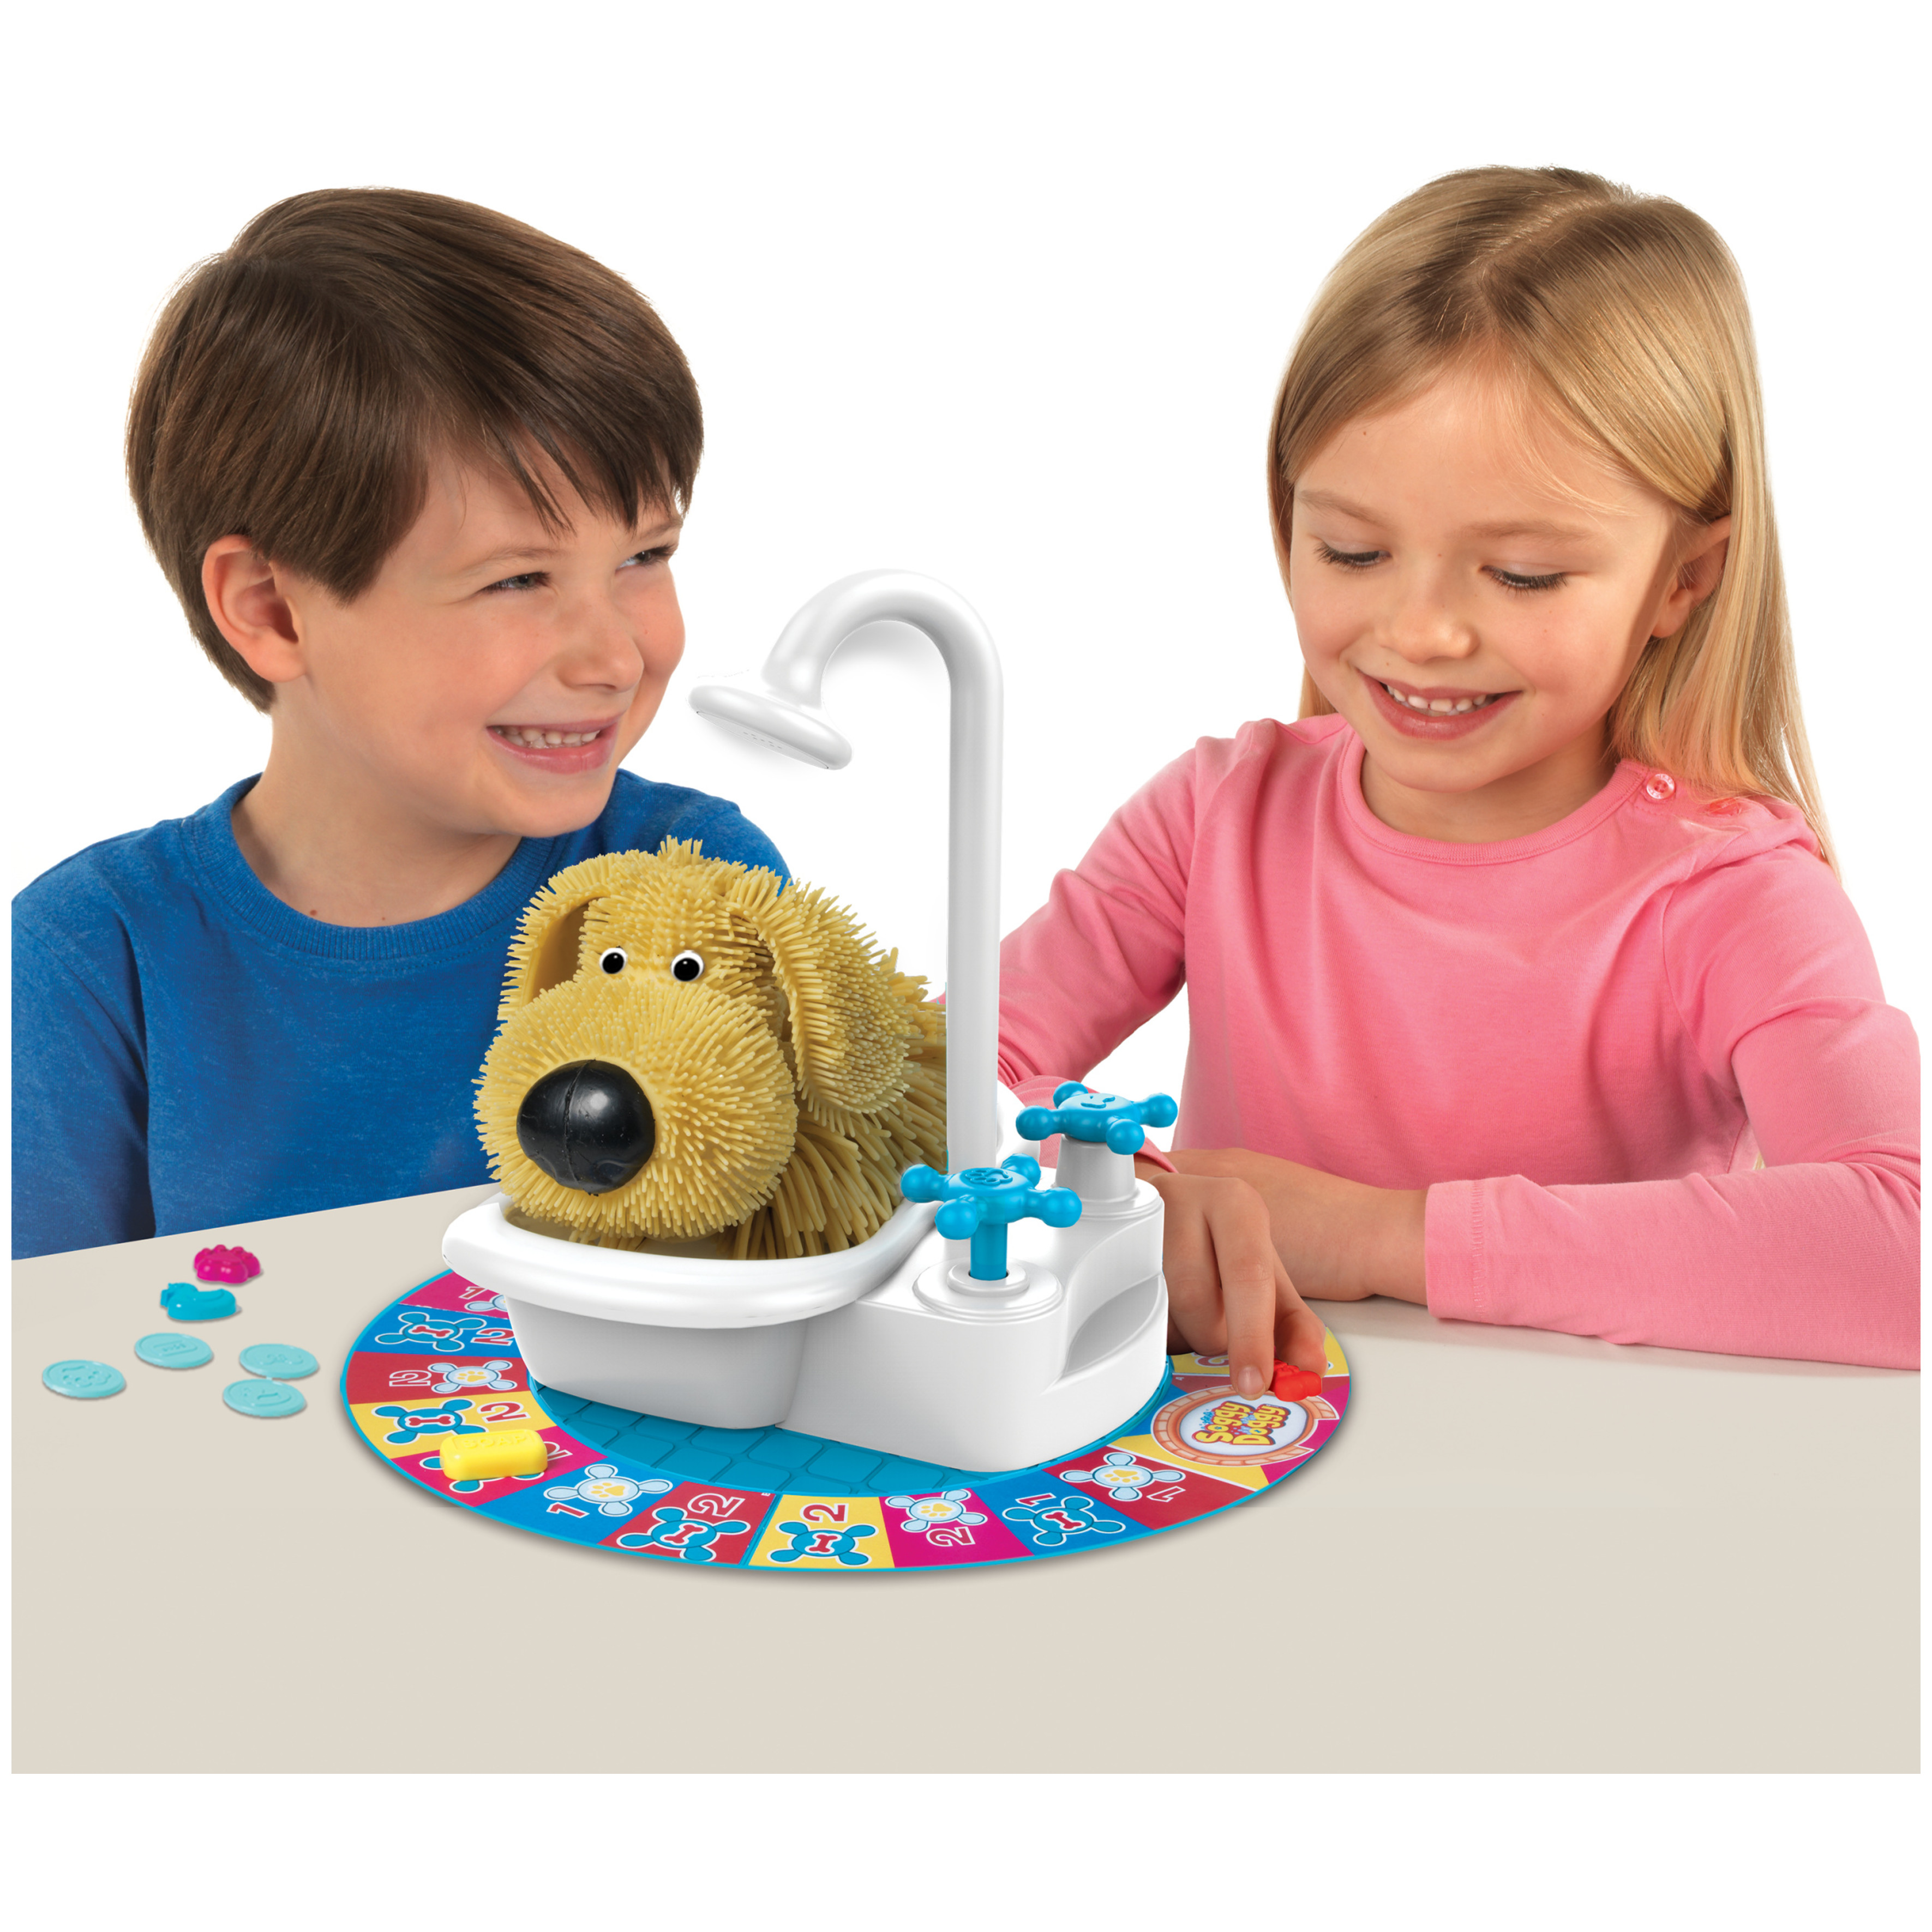 Soggy Doggy Board Game for kids ages 4-8 - image 3 of 8